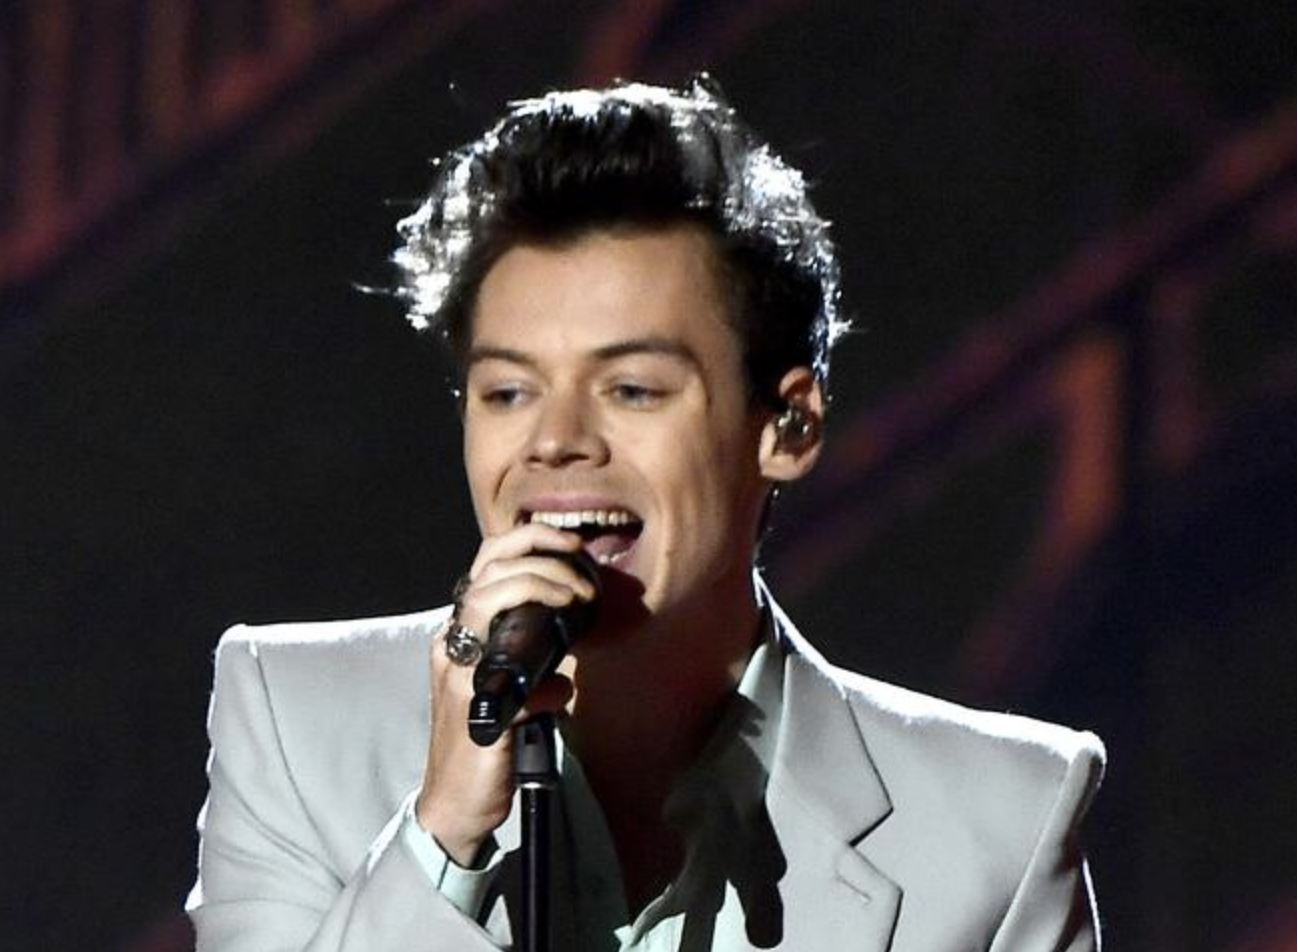 Harry Styles rumored to be dating seventh Victoria’s Secret model following Olivia Wilde split